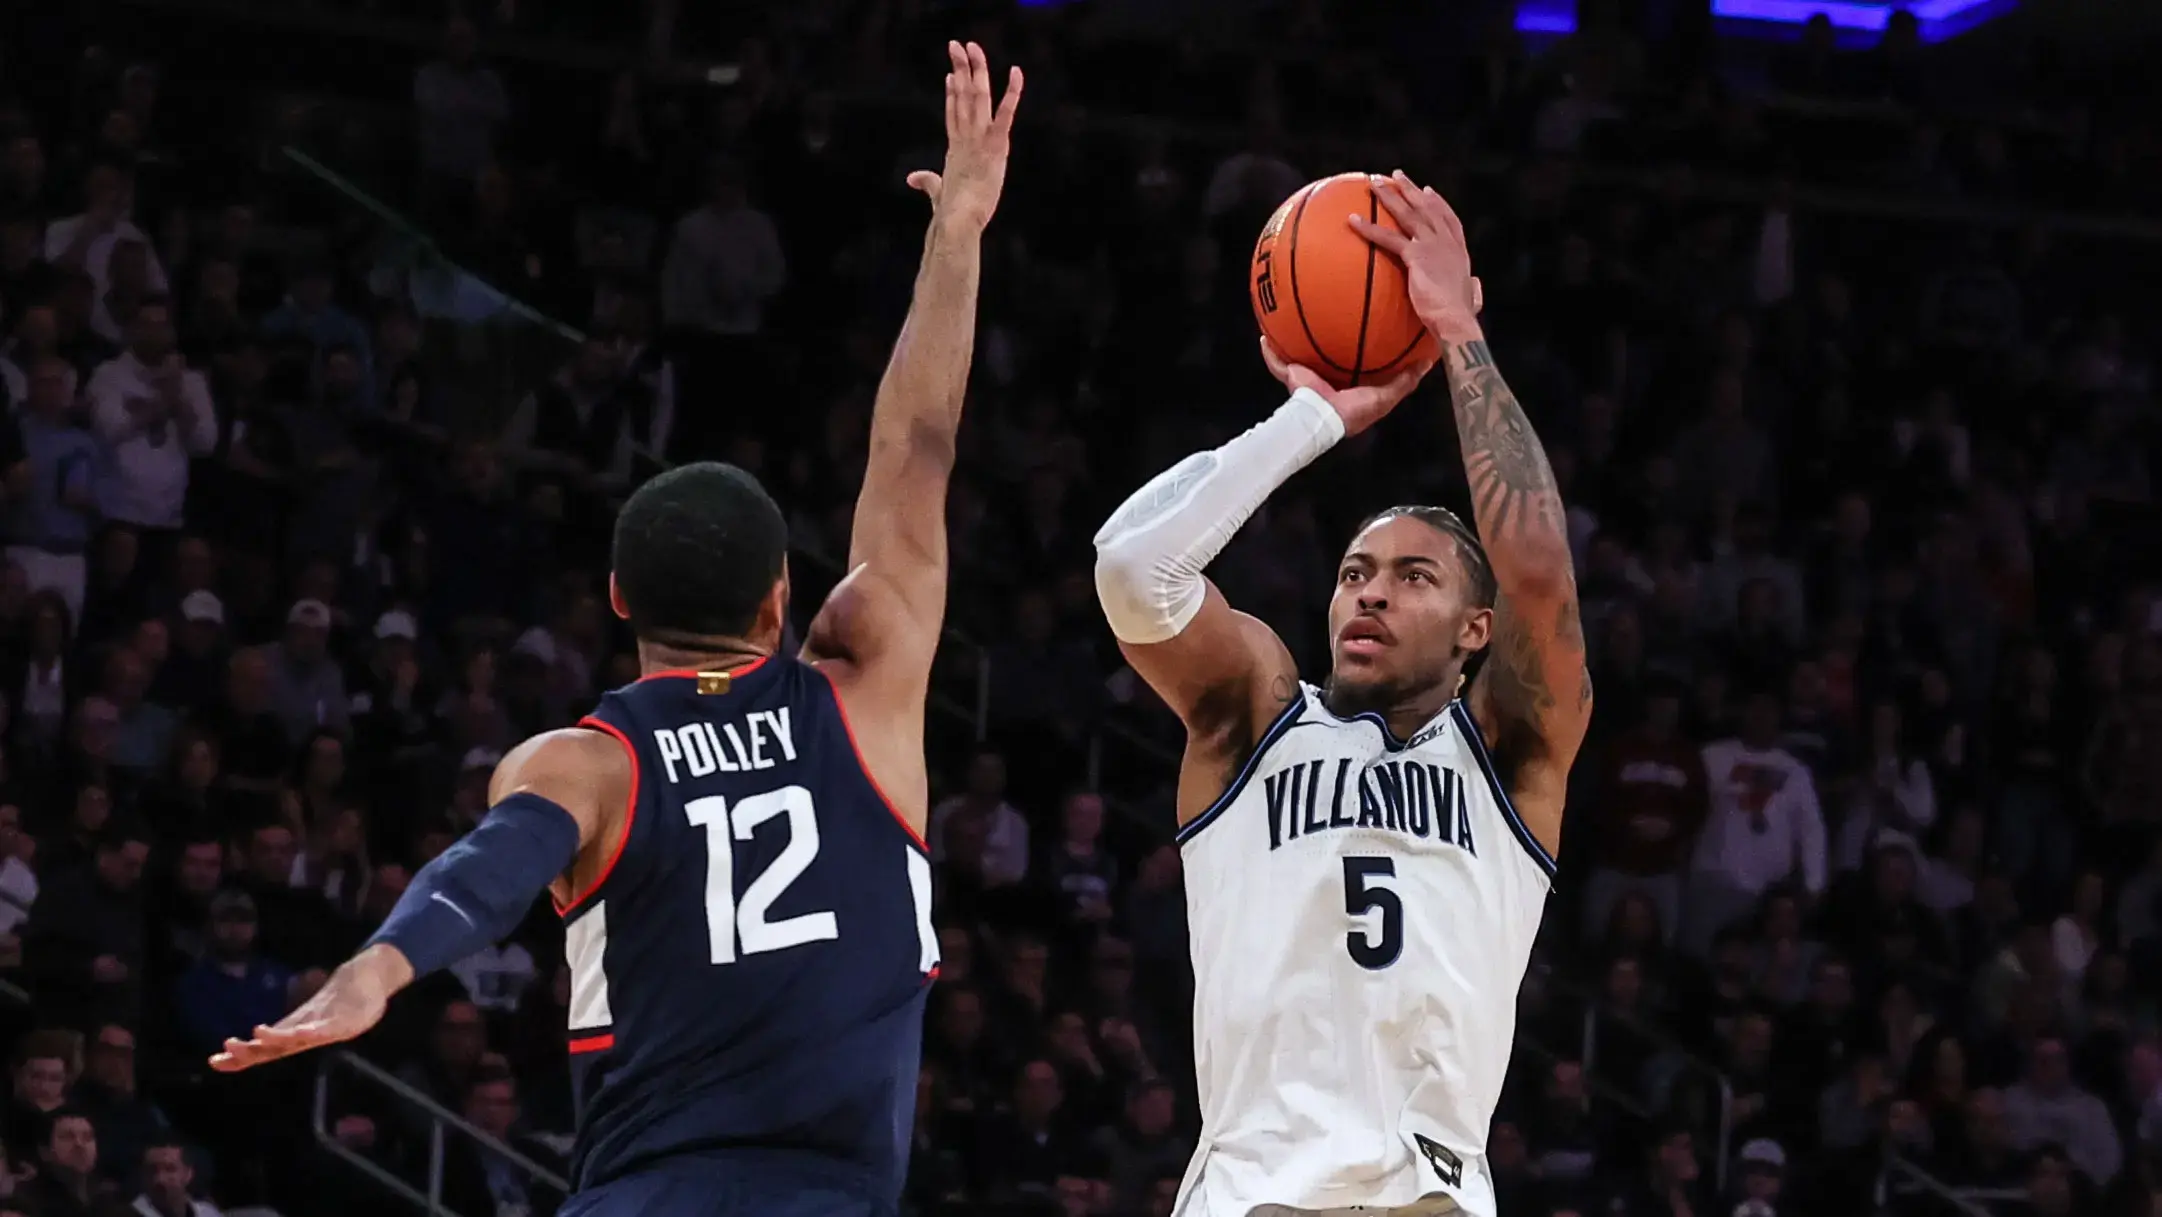 Mar 11, 2022; New York, NY, USA; Villanova Wildcats guard Justin Moore (5) shoots the ball as Connecticut Huskies forward Tyler Polley (12) defends during the first half at Madison Square Garden. / Vincent Carchietta-USA TODAY Sports